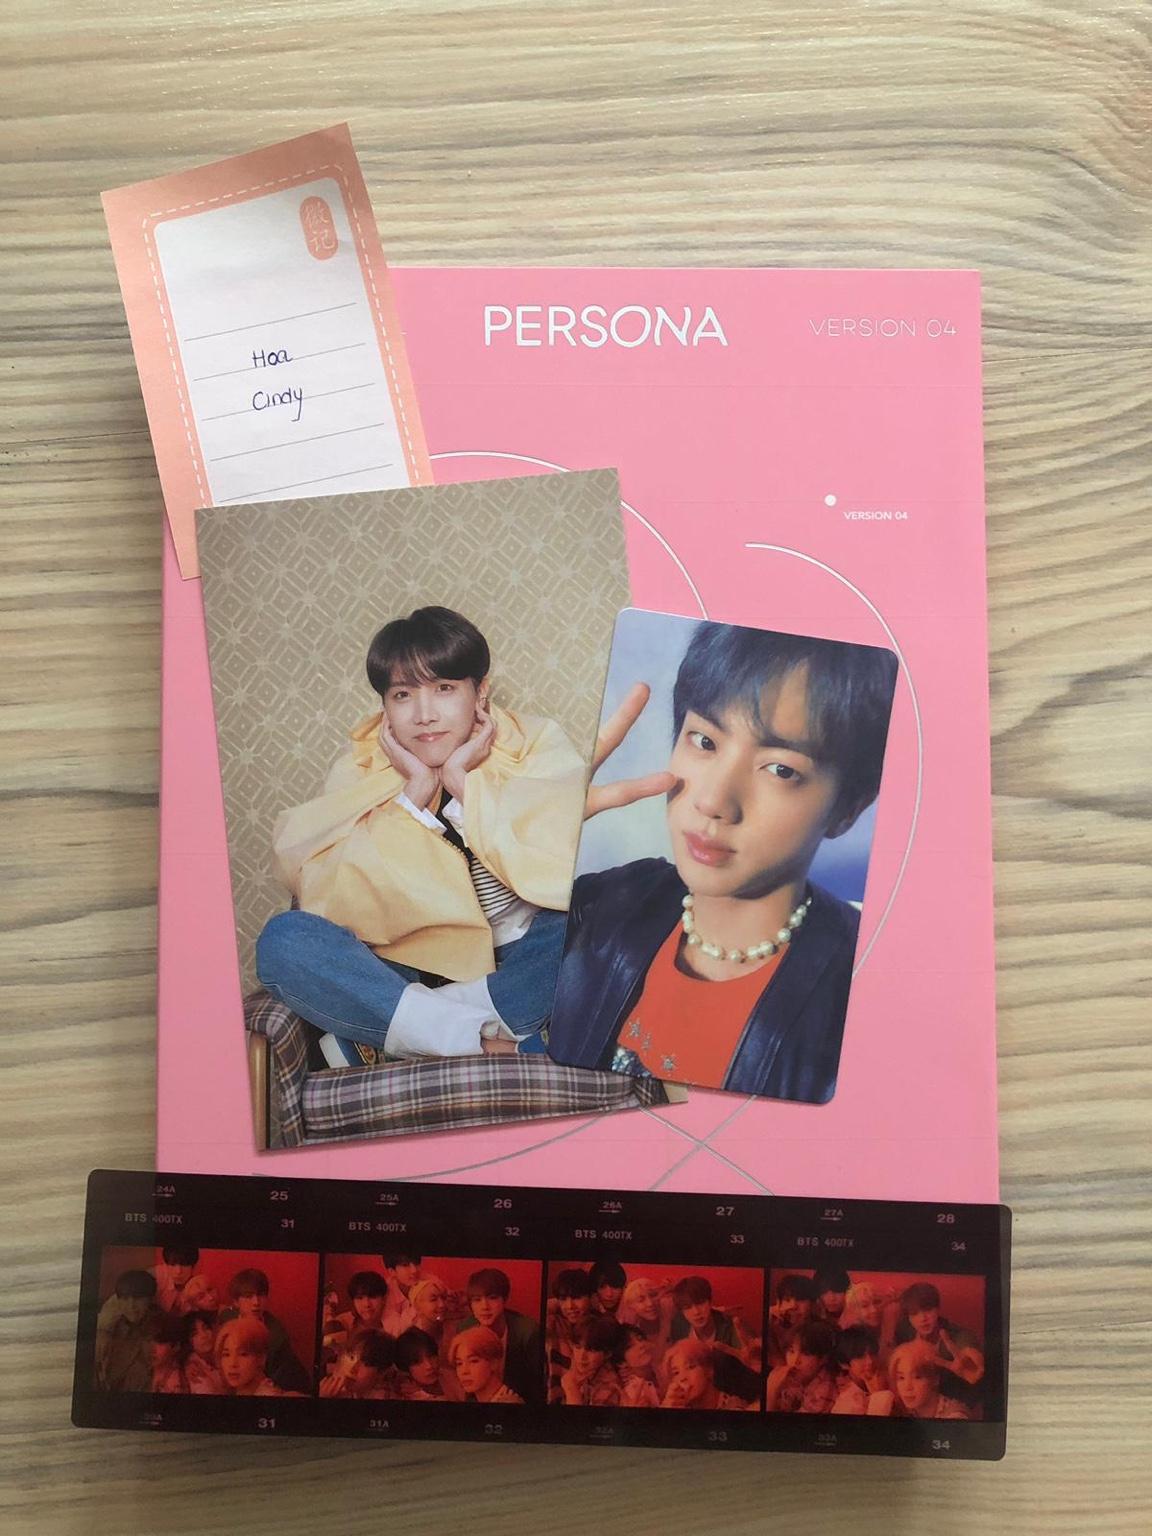 BTS - MOTS: Persona (VERSION 4) in 10179 Berlin for €21.00 for sale